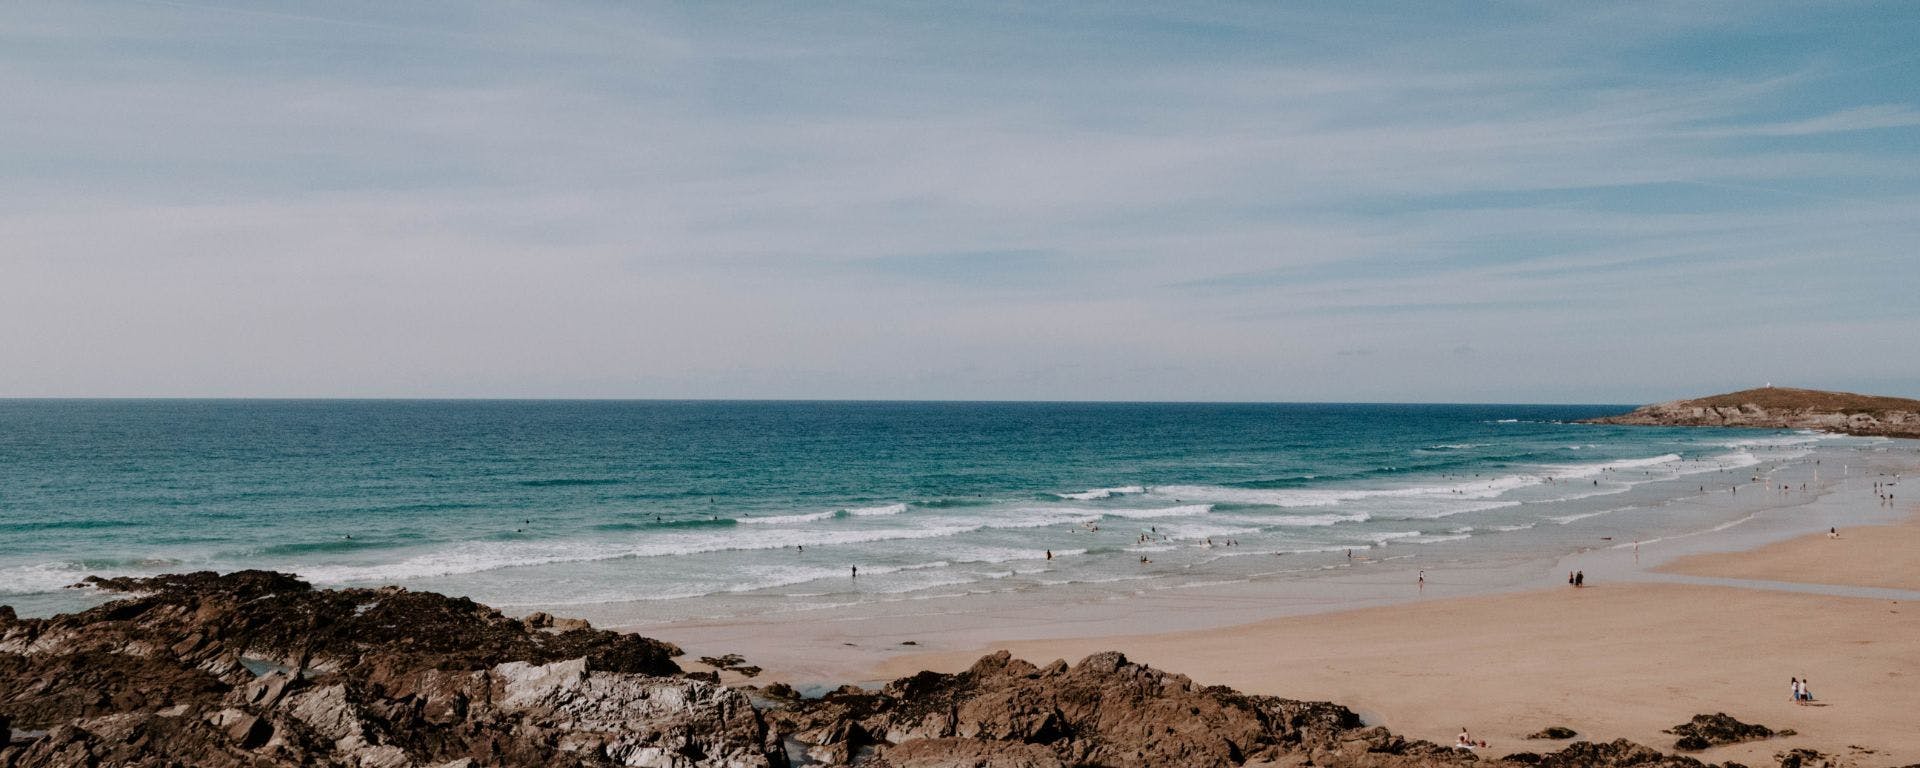 Coworking, Coliving and Surfing in Newquay (England)